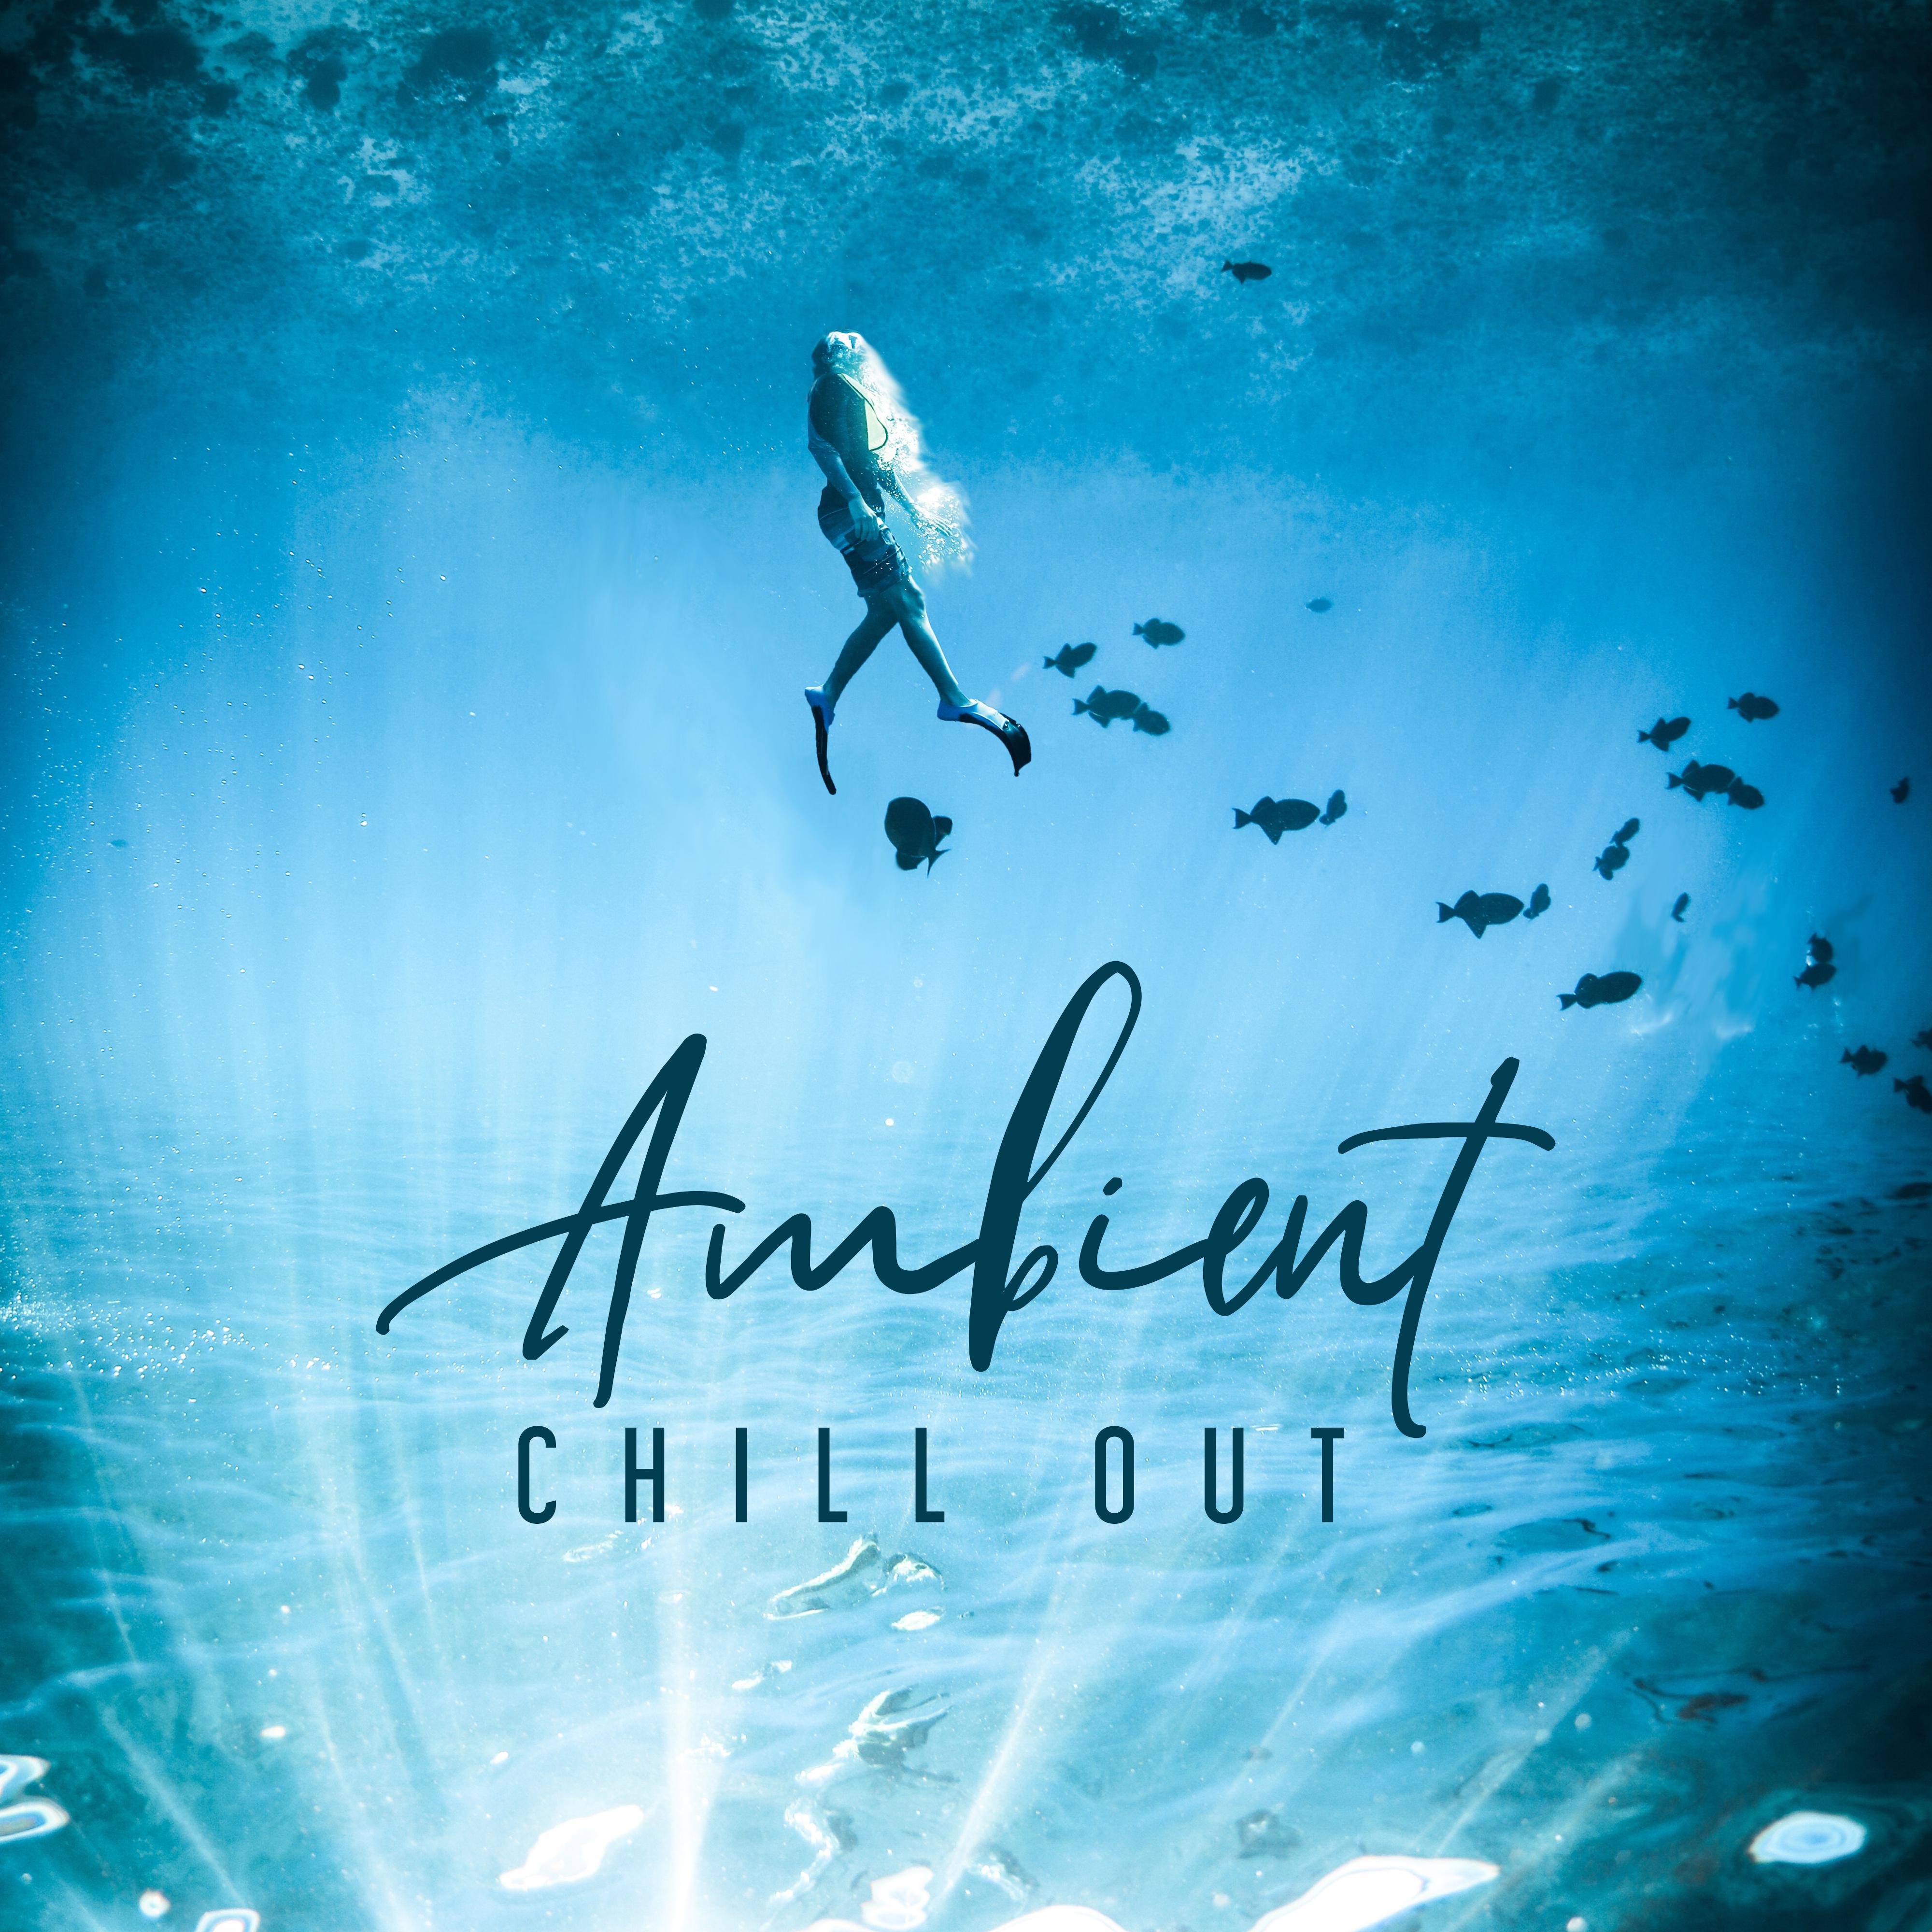 Ambient Chill Out - Lie Down and Relax with the Most Relaxing Collection of Chillout Music in 2019